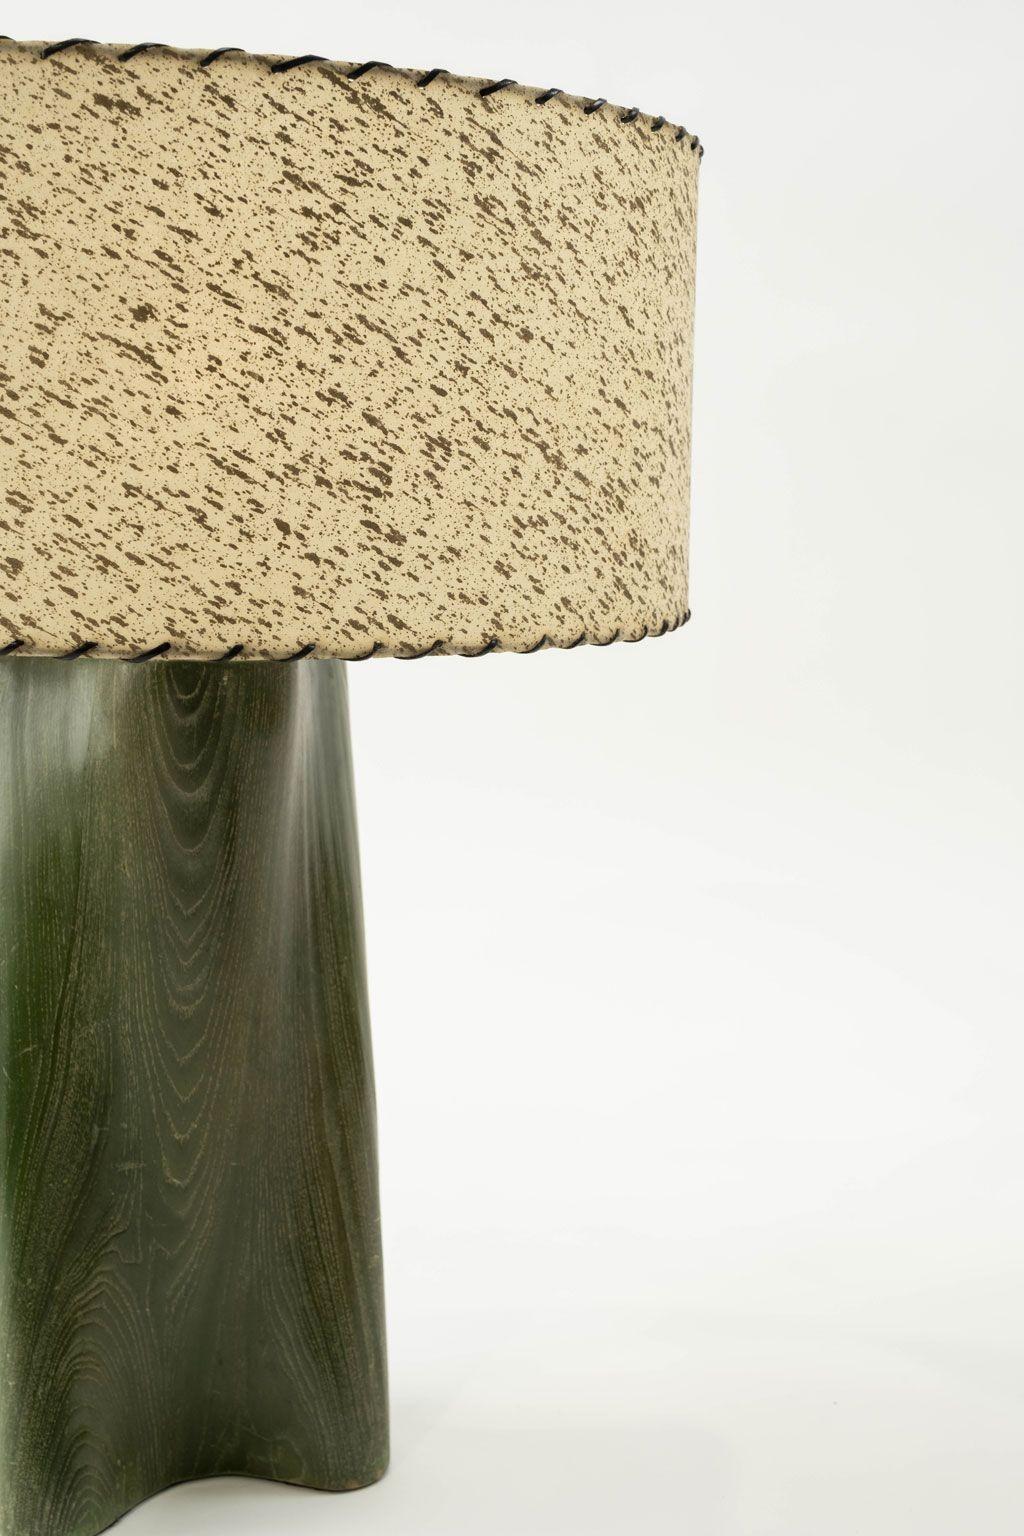 Modern Green-Dyed Carved Wood Table Lamp For Sale 3